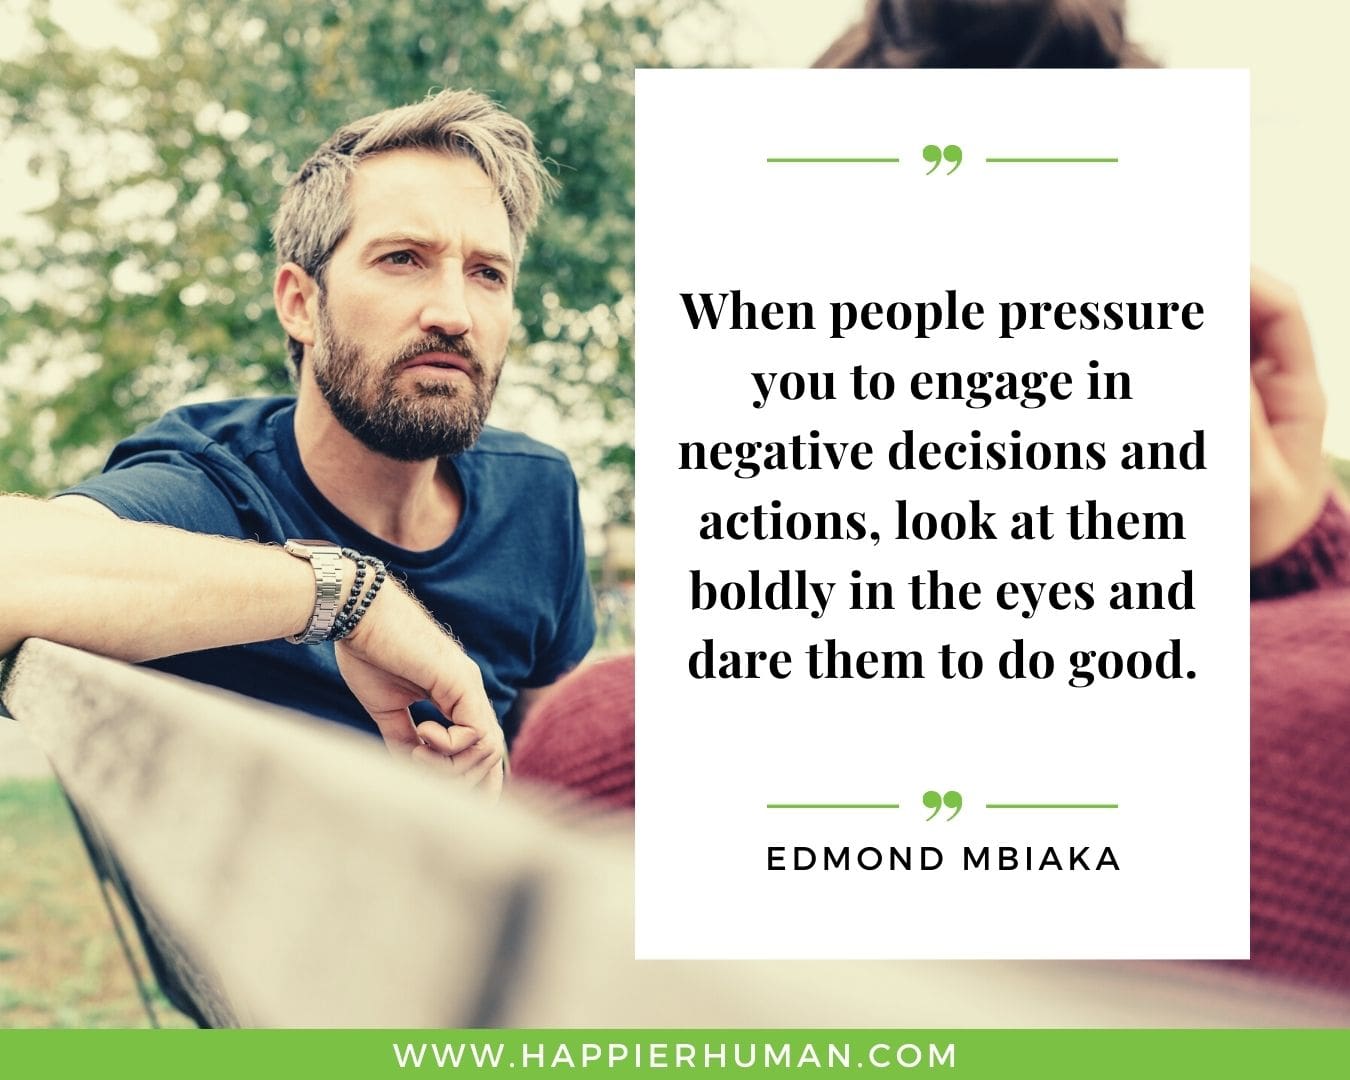 Toxic People Quotes - “When people pressure you to engage in negative decisions and actions, look at them boldly in the eyes and dare them to do good.” – Edmond Mbiaka